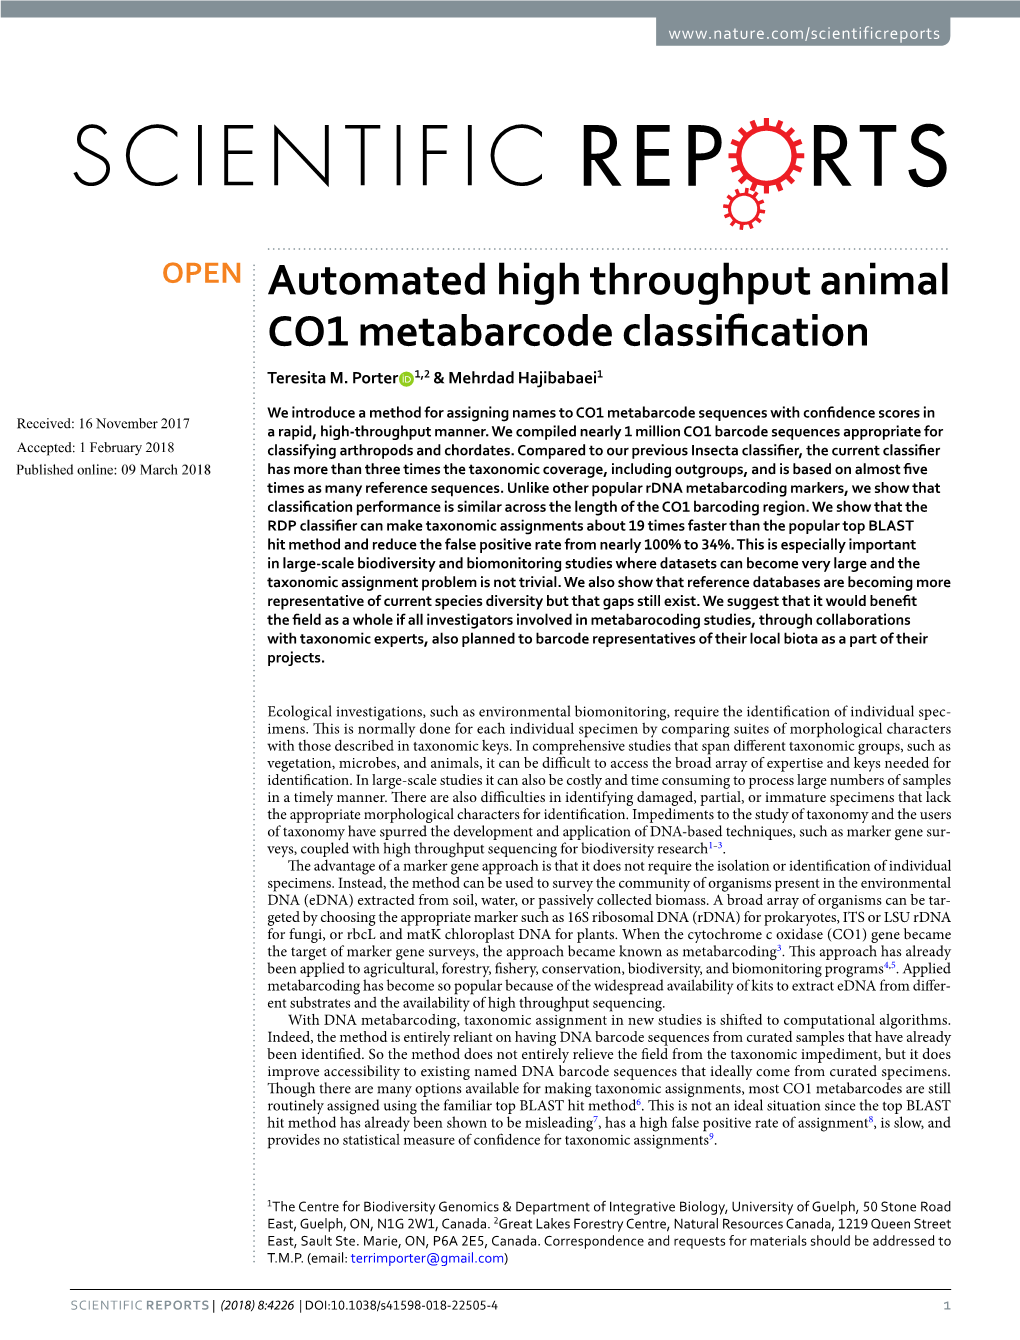 Automated High Throughput Animal CO1 Metabarcode Classification